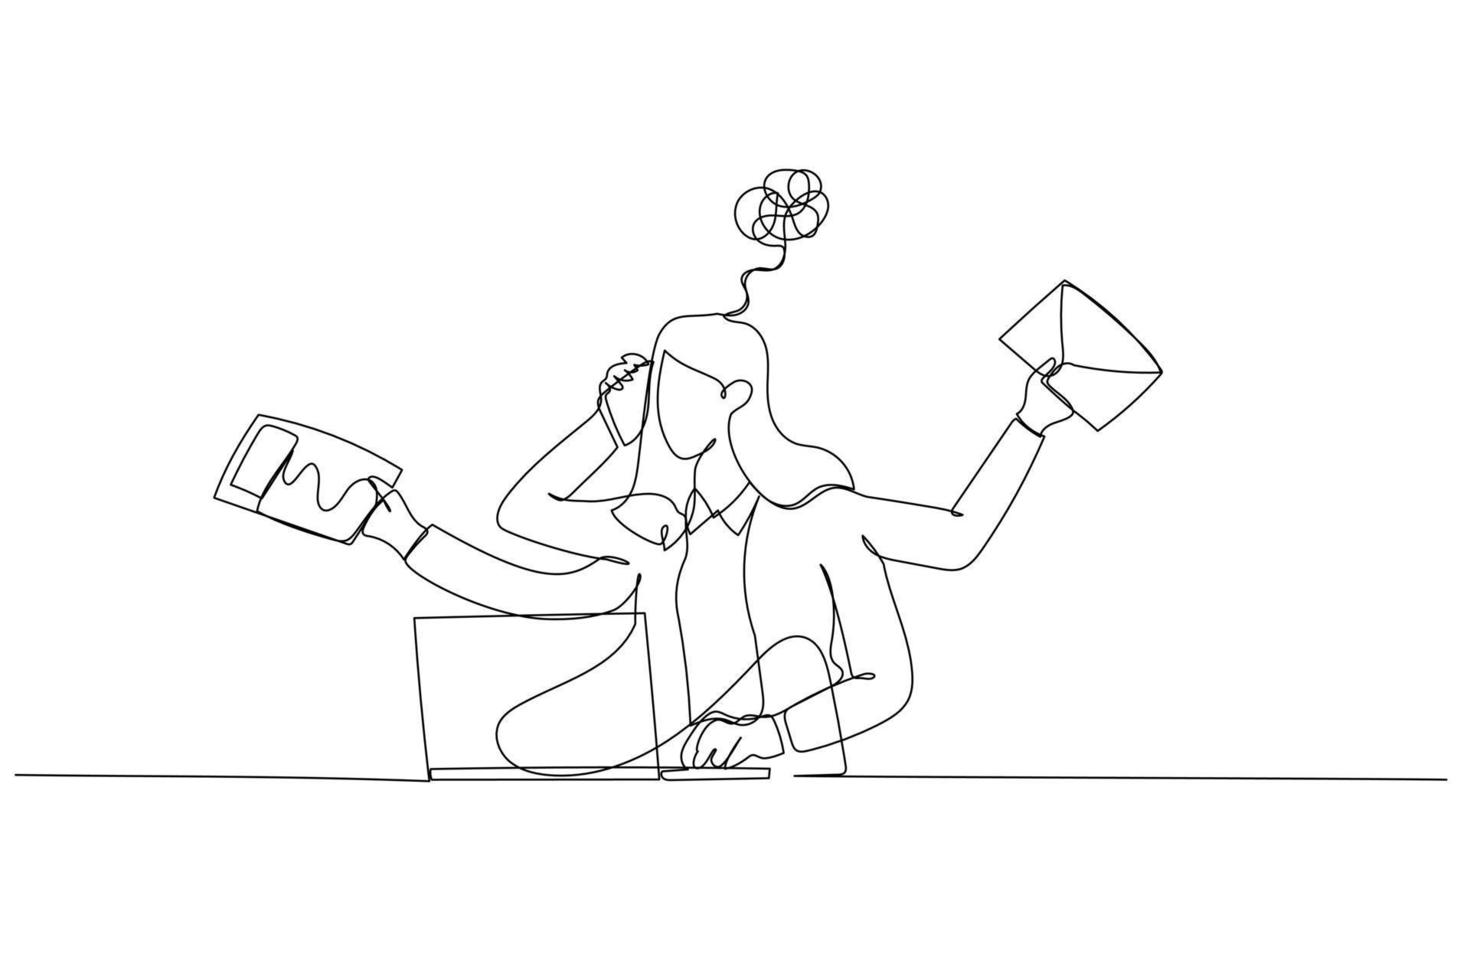 Illustration of businesswoman dizzy stressed because of daily work receive email sending paper. Single continuous line art style vector